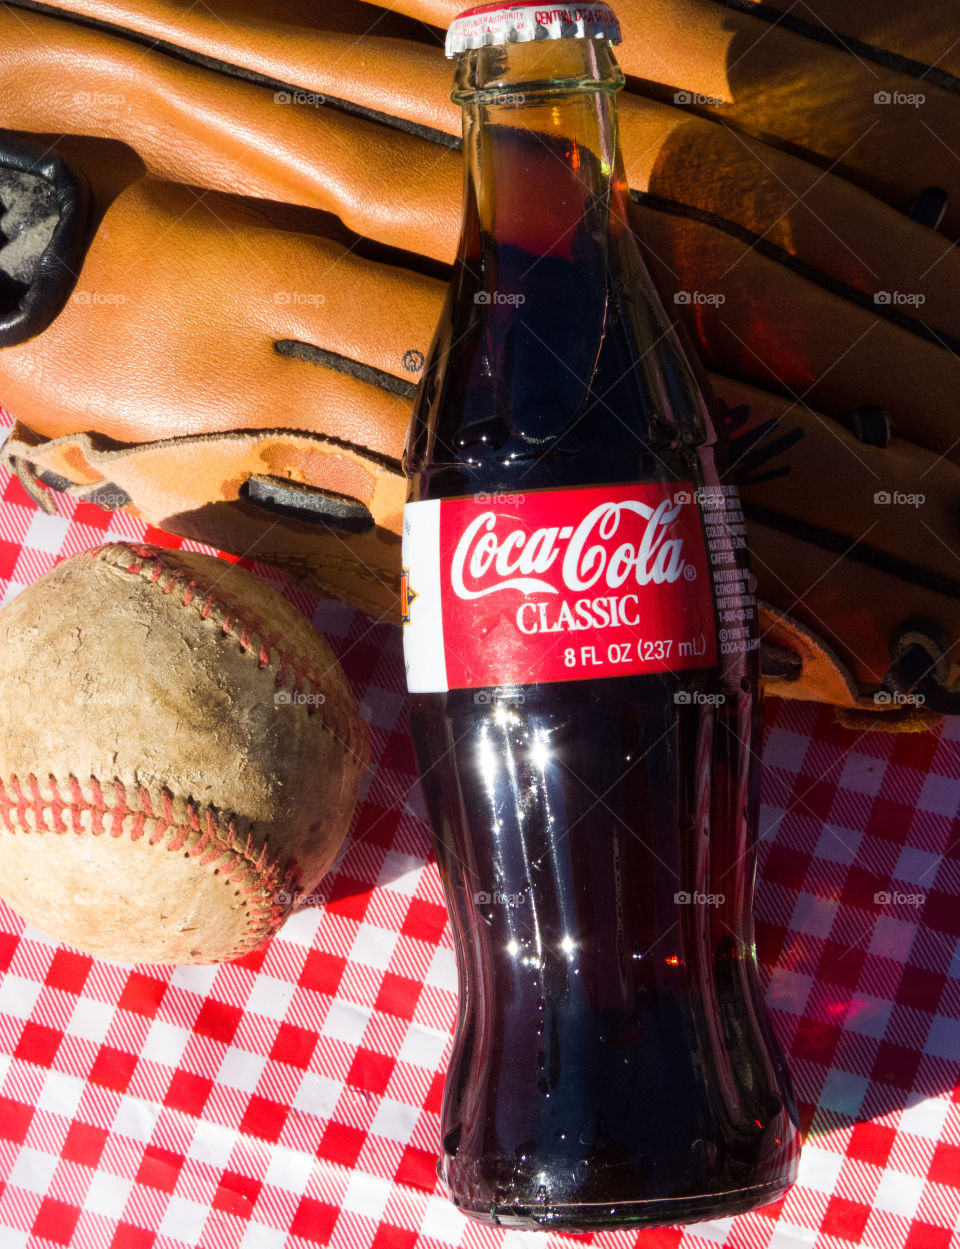 Classic Coca-Cola bottle with baseball and glove on a red checkered background.